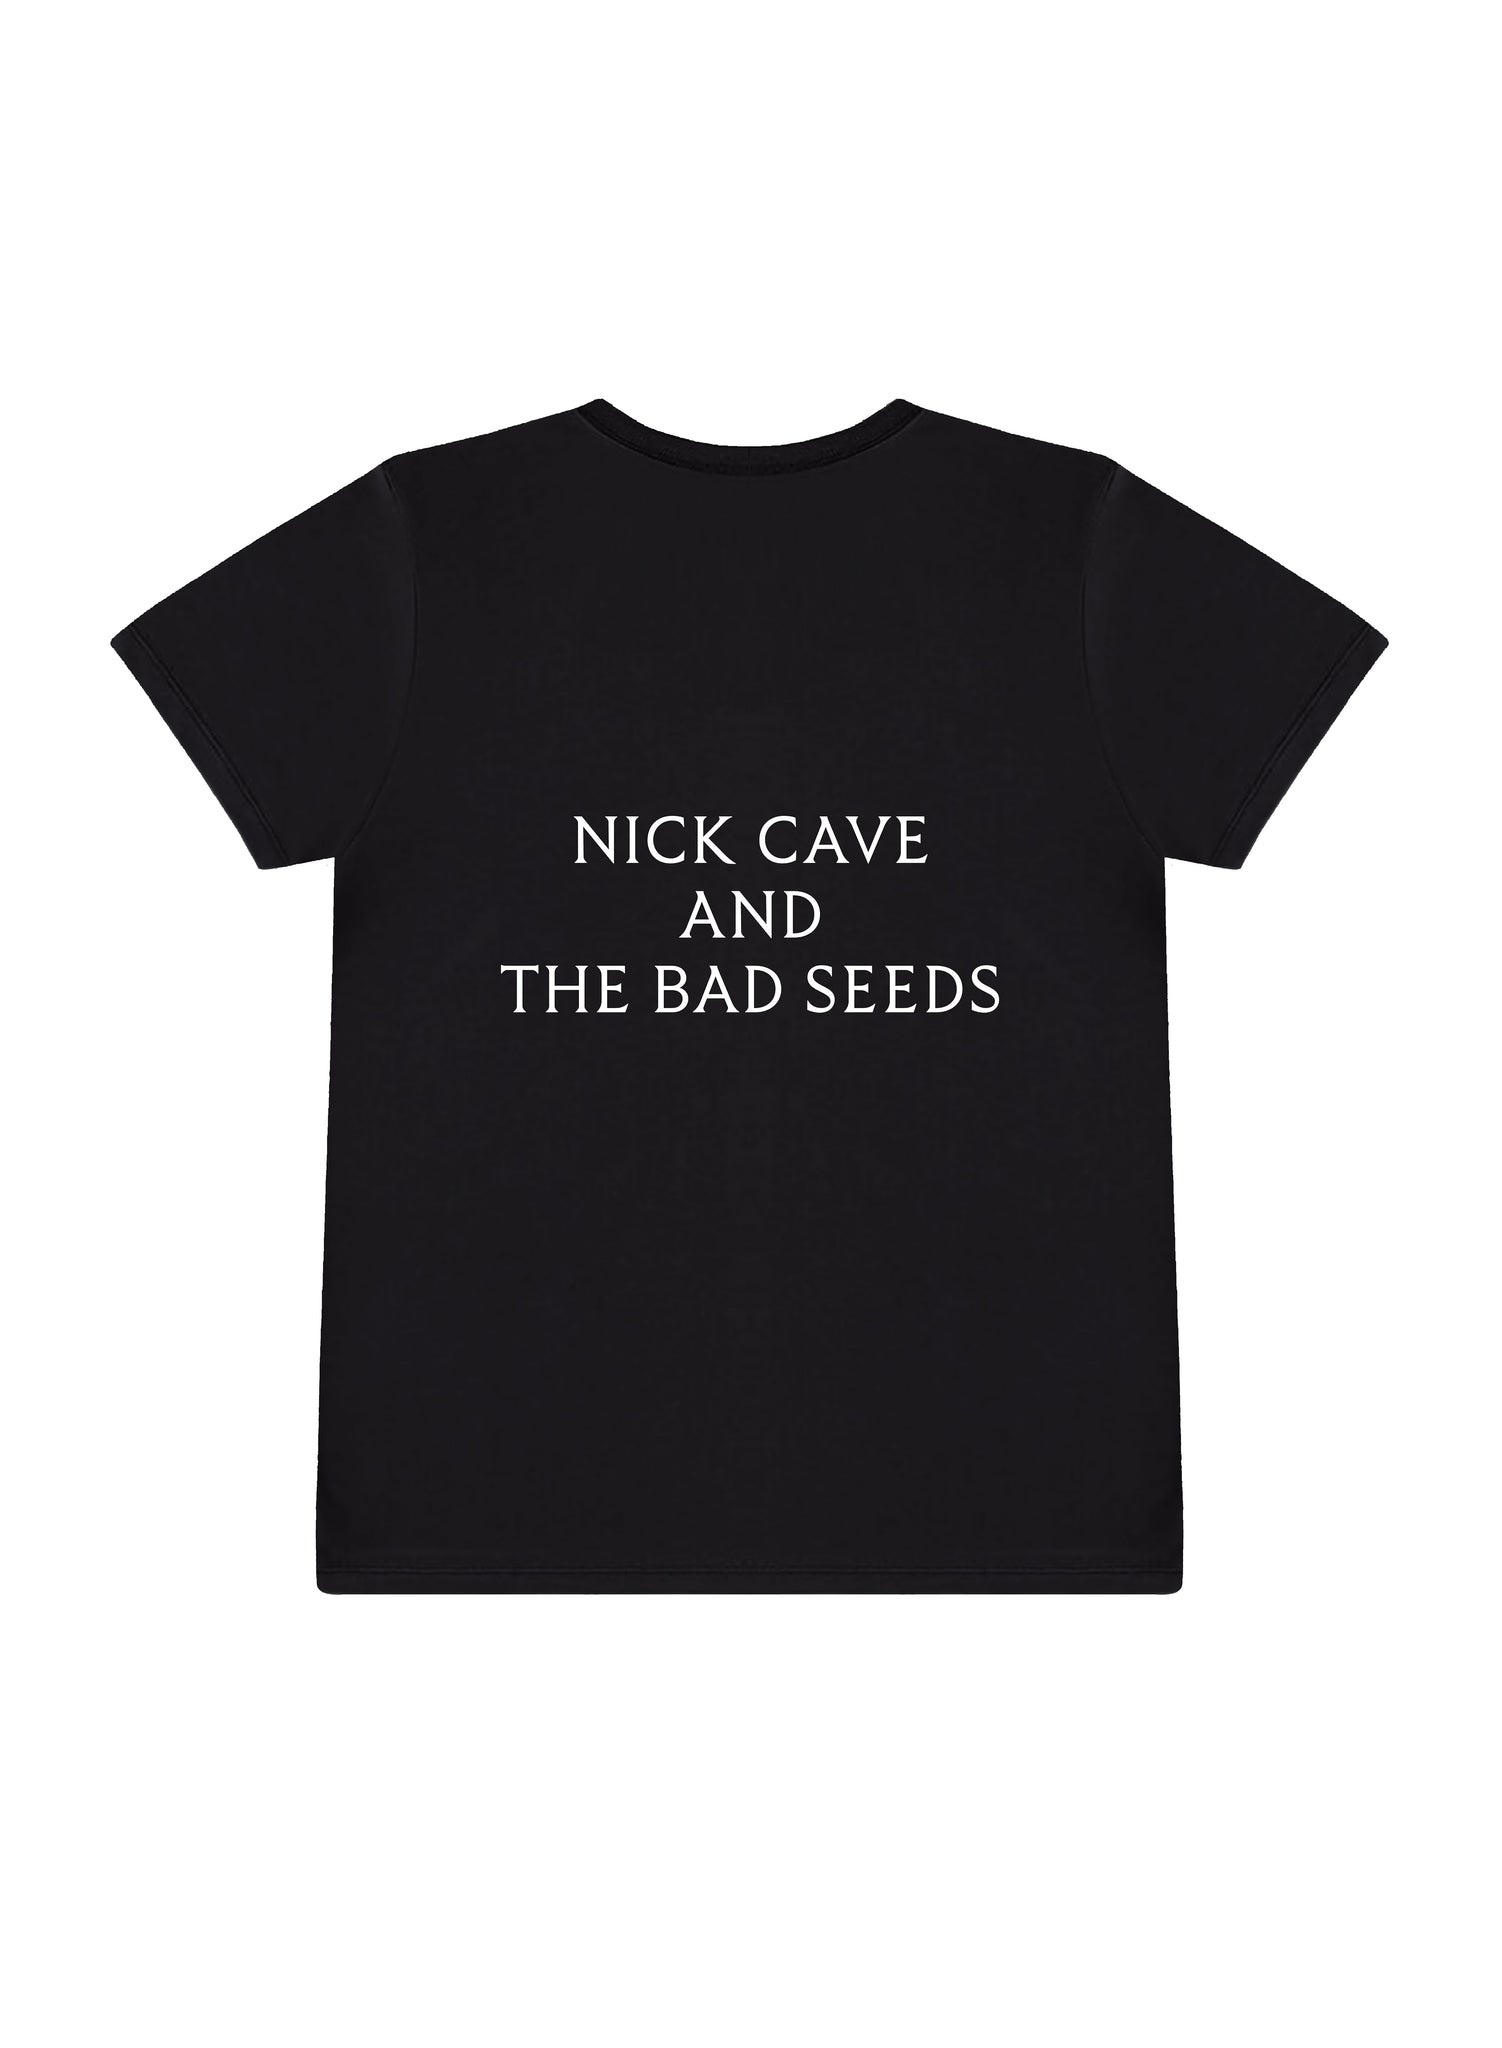 NICK CAVE AND THE BAD SEEDS X THE VAMPIRE'S WIFE 'BITE ME' T SHIRT - 4